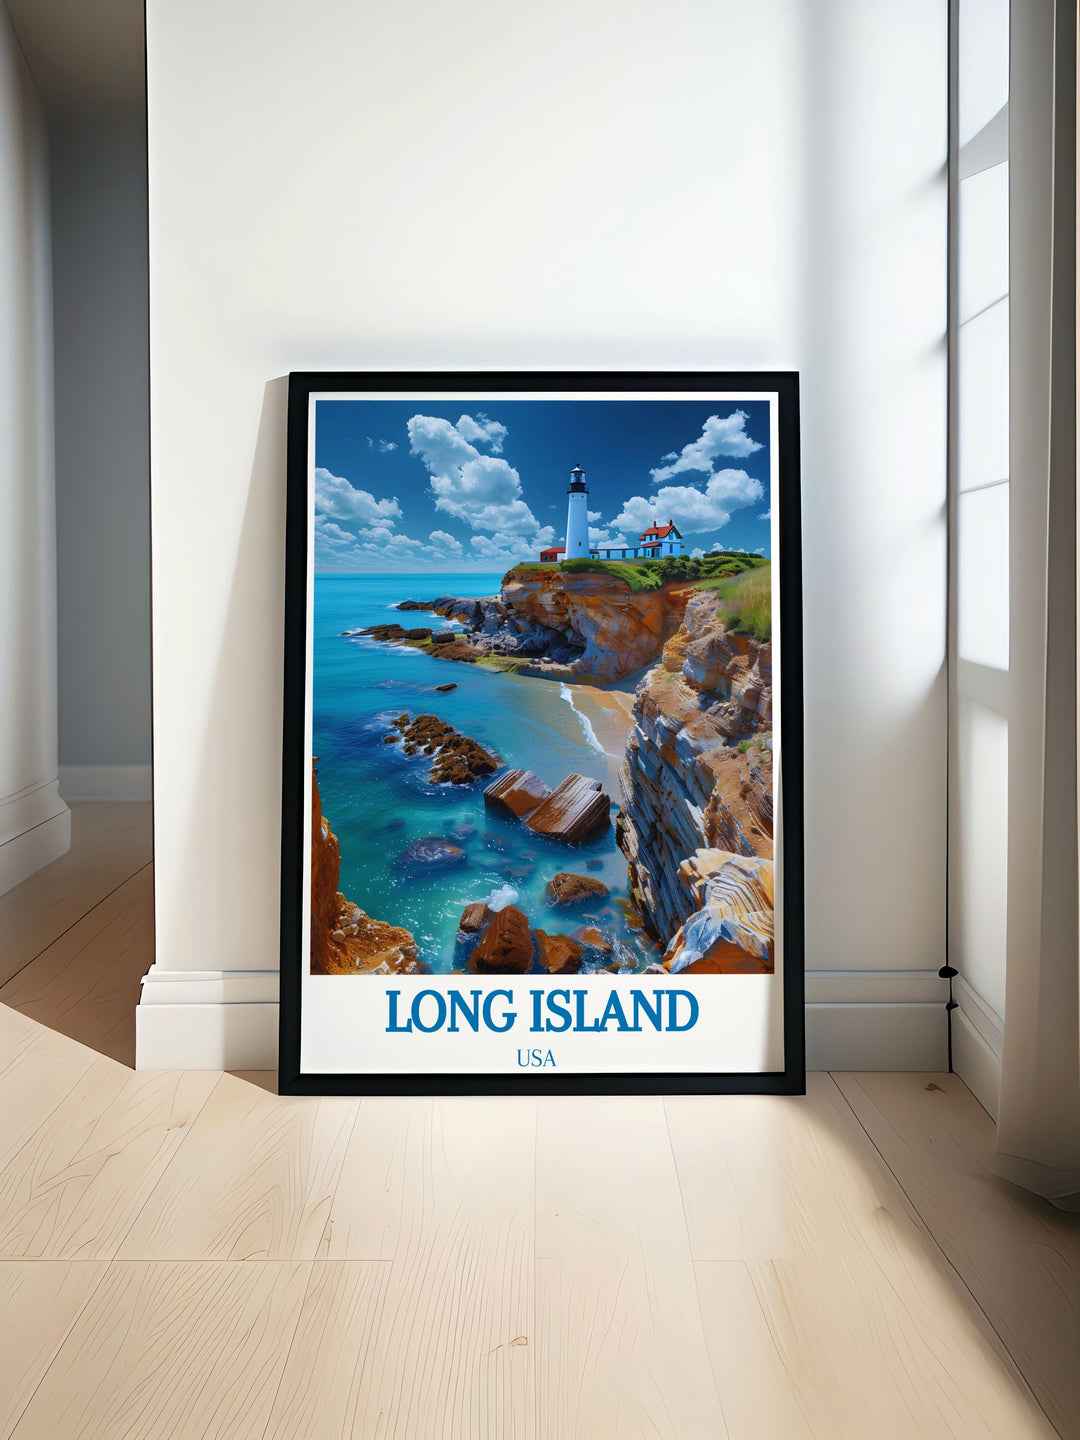 This travel poster beautifully depicts the diverse beauty of Long Island and the historic allure of Montauk Point Lighthouse, ideal for adding a touch of New Yorks coastal heritage to any room.